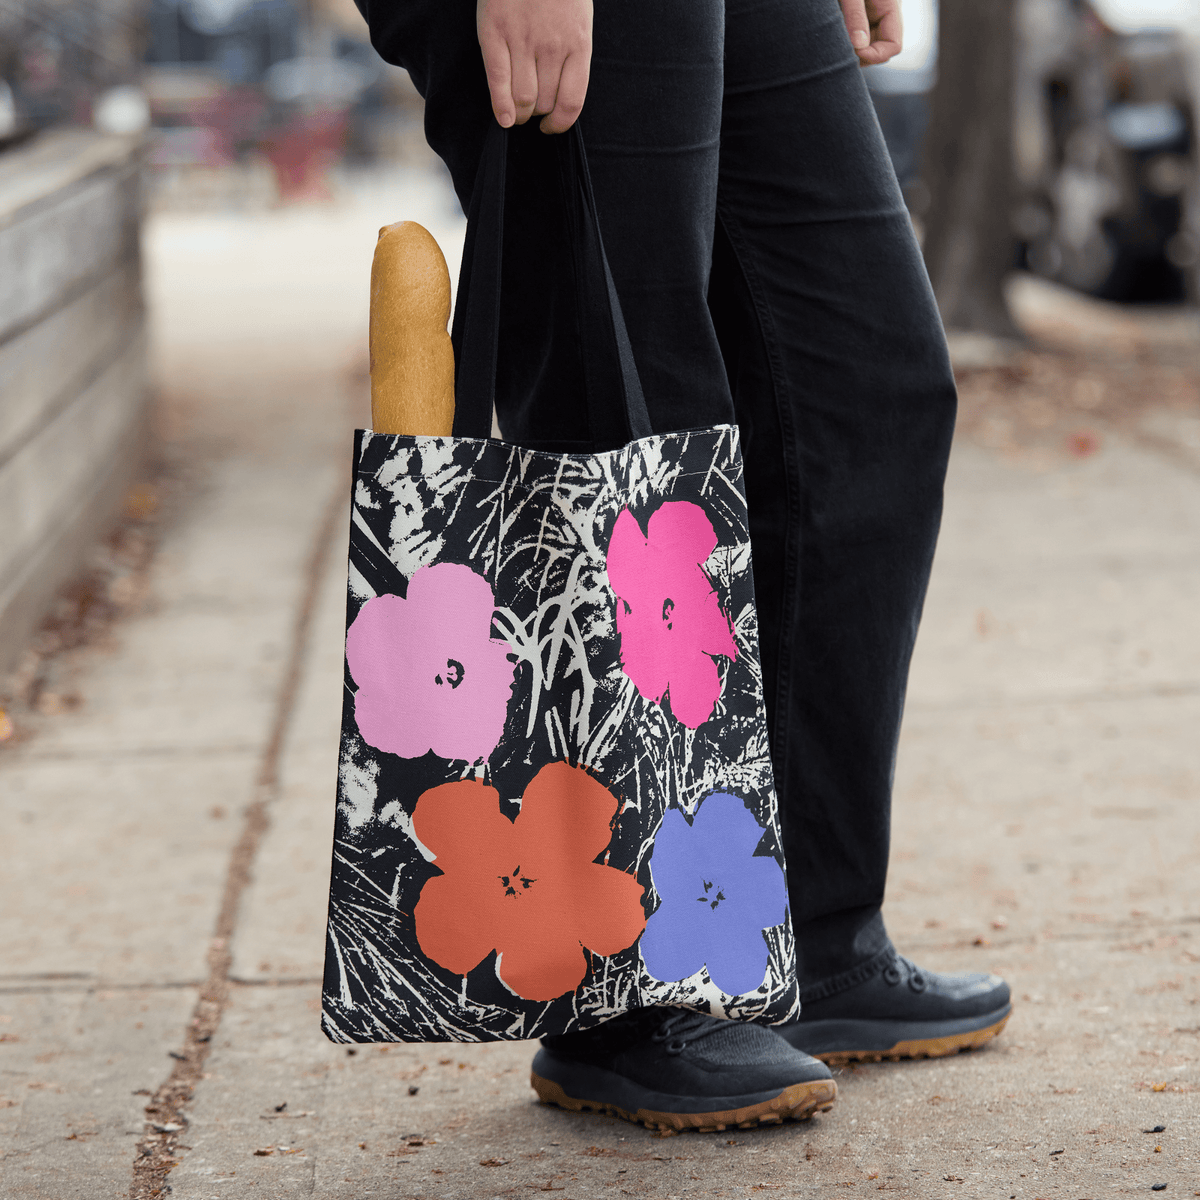 Warhol Flowers Canvas Tote Bag - Pink Tote Bags Andy Warhol Foundation For The Visual Arts 